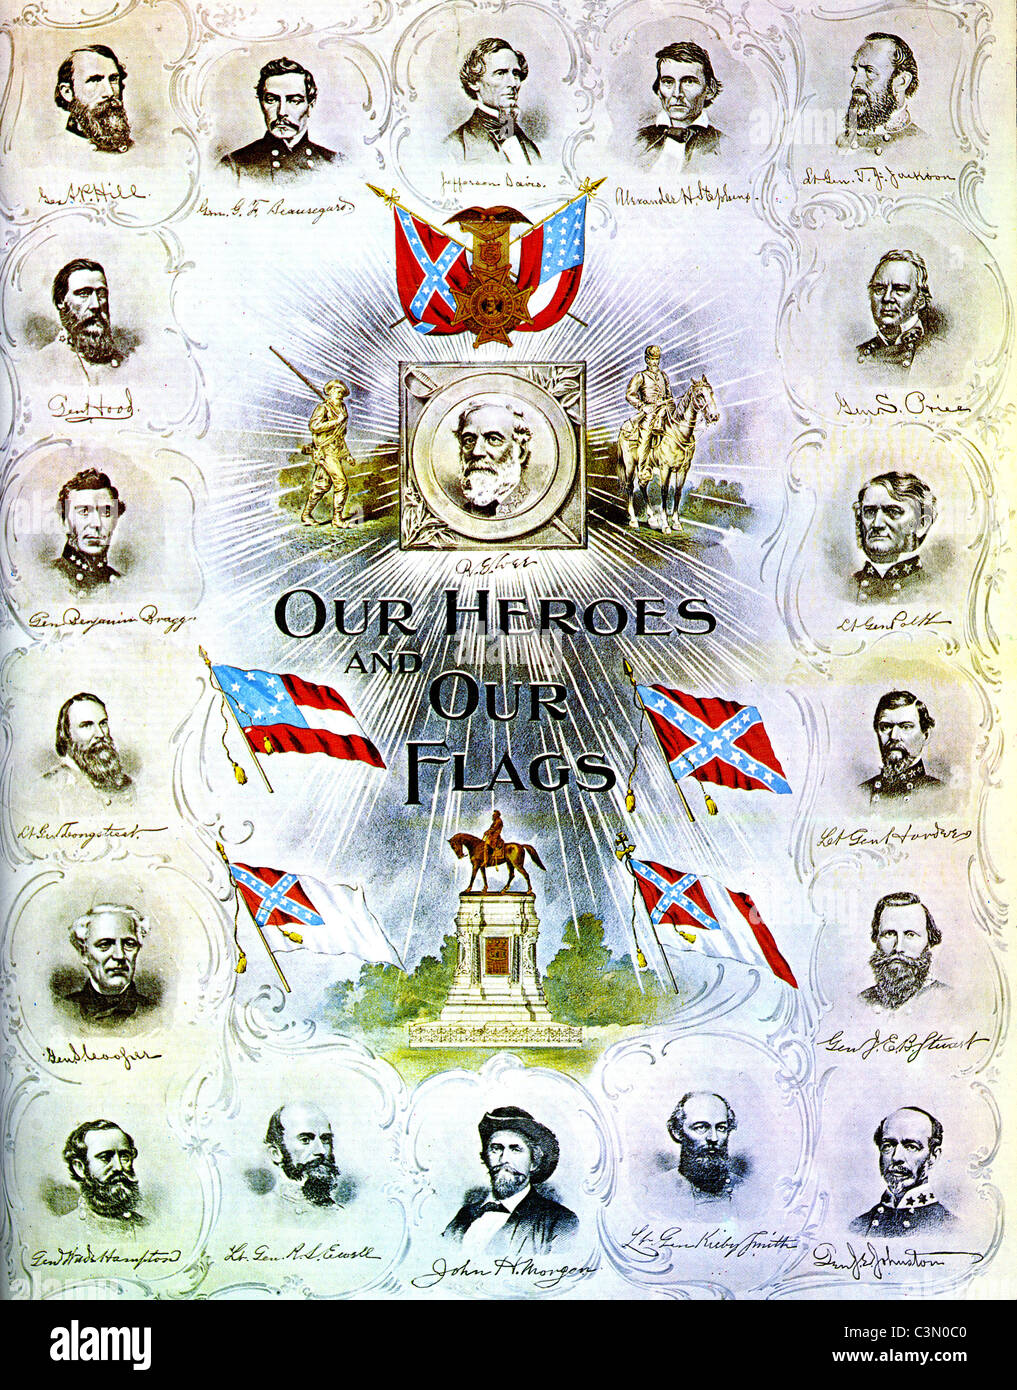 CONFEDERATE LEADERS and State flags published in1863 Stock Photo